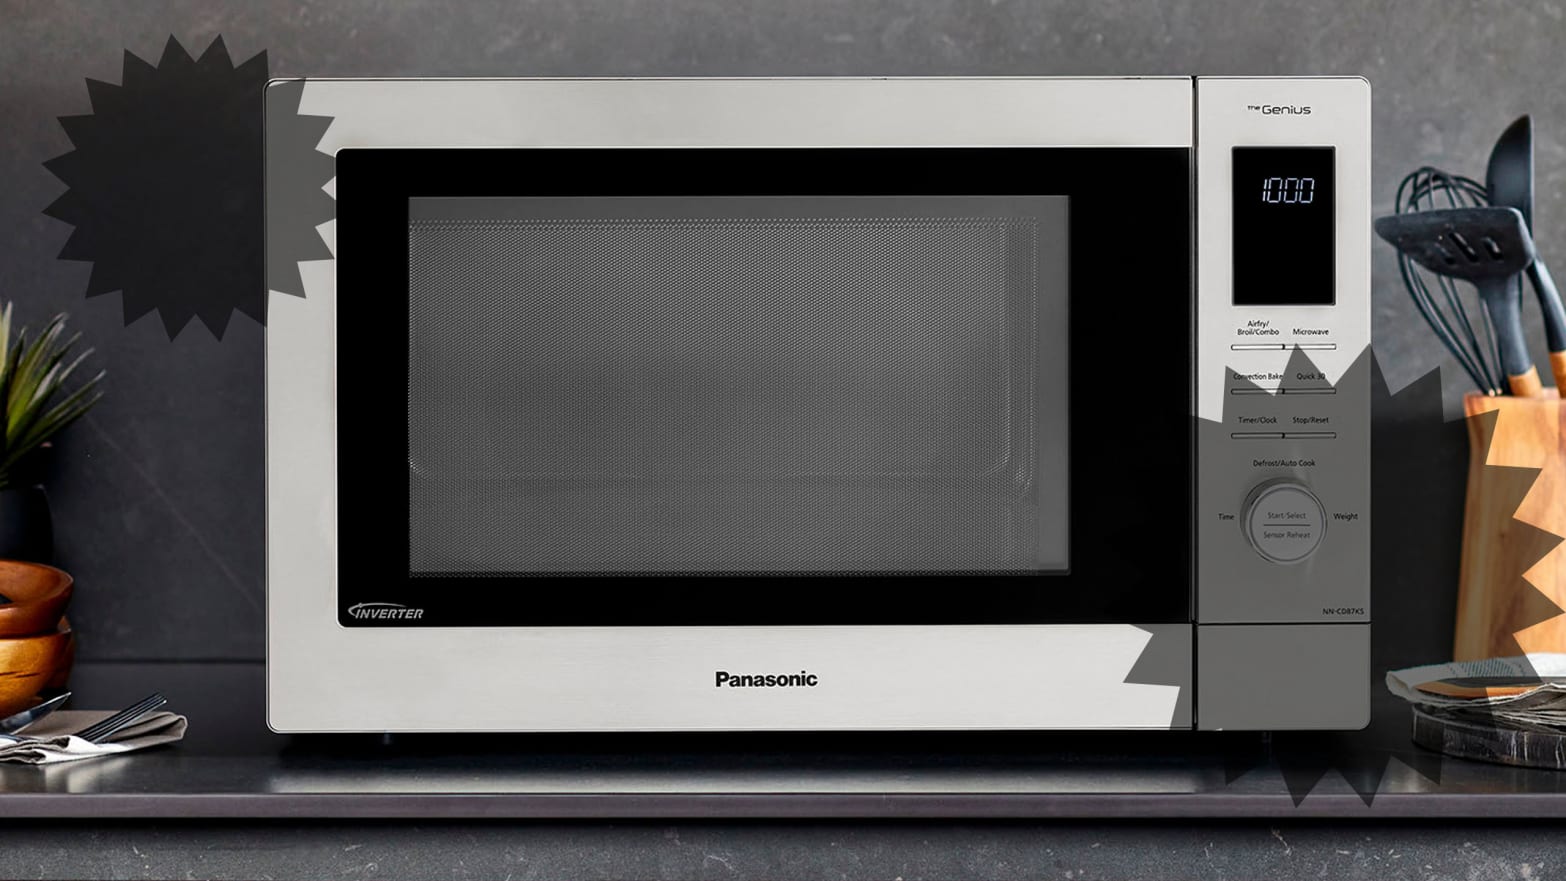 Panasonic Inverter Microwave- new technology review - YouTube